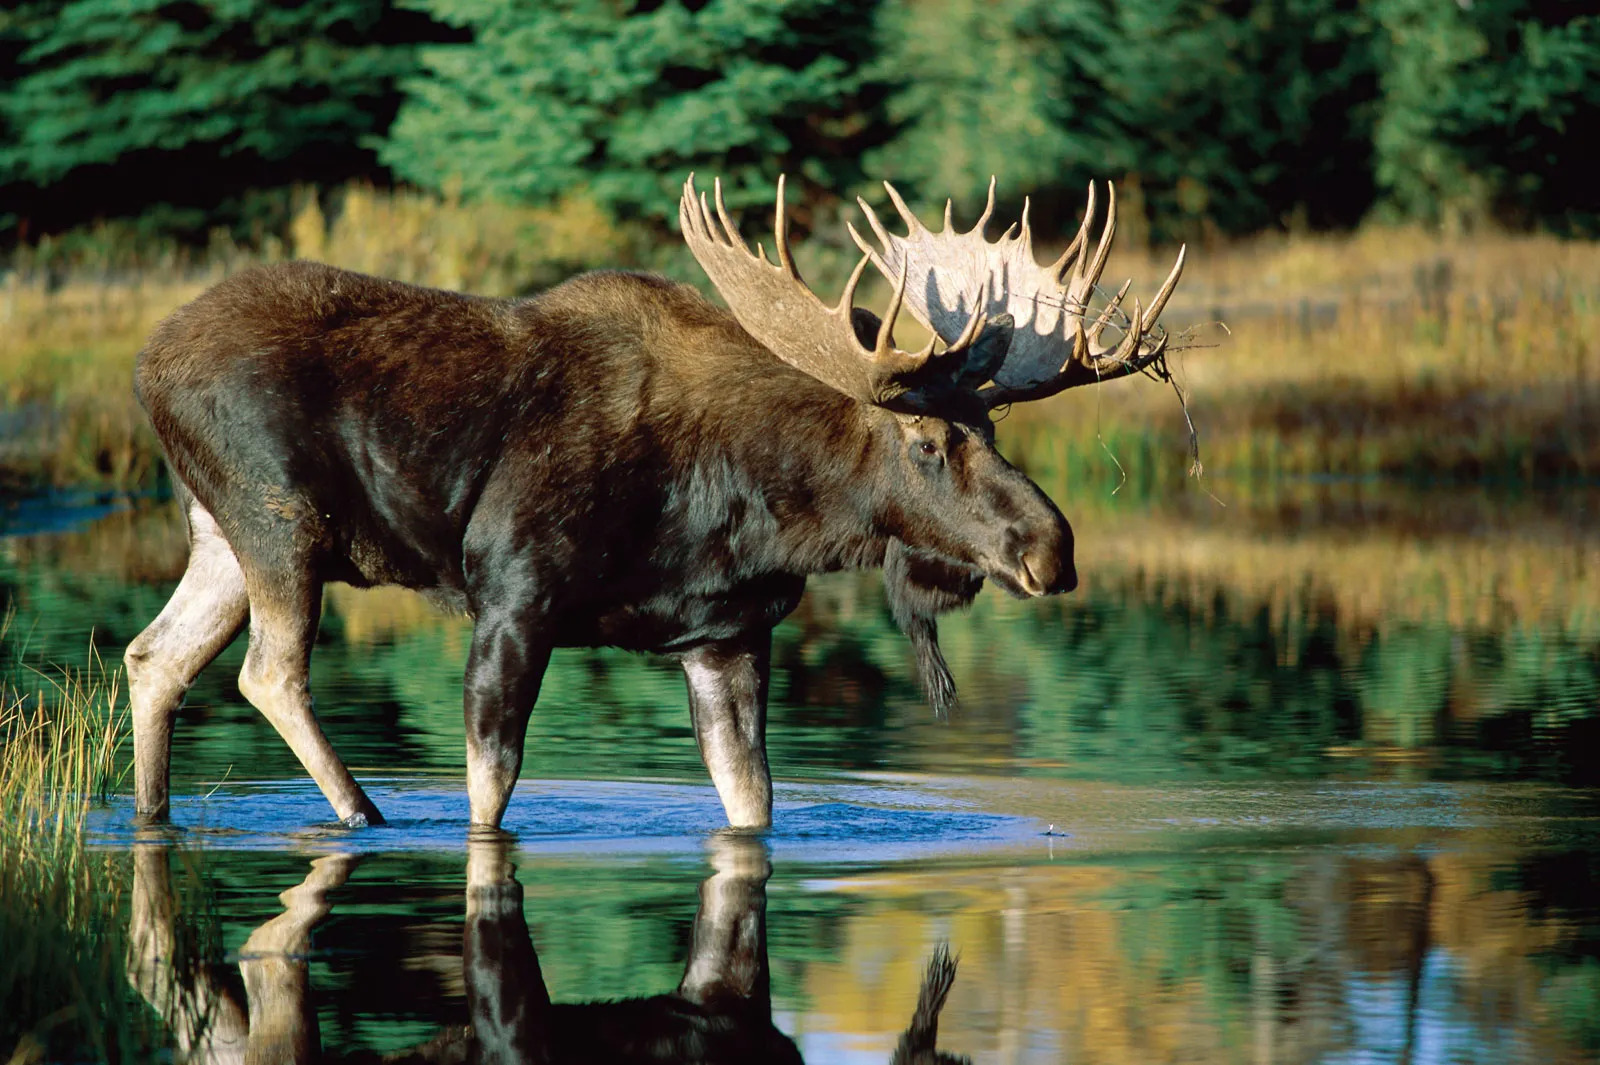 A male adult moose walks in a river. His antlers have bits of plants caught in them. The water is gently disturbed by the movement. The background is a forested area, out of focus - North Park, Jackson County Colorado